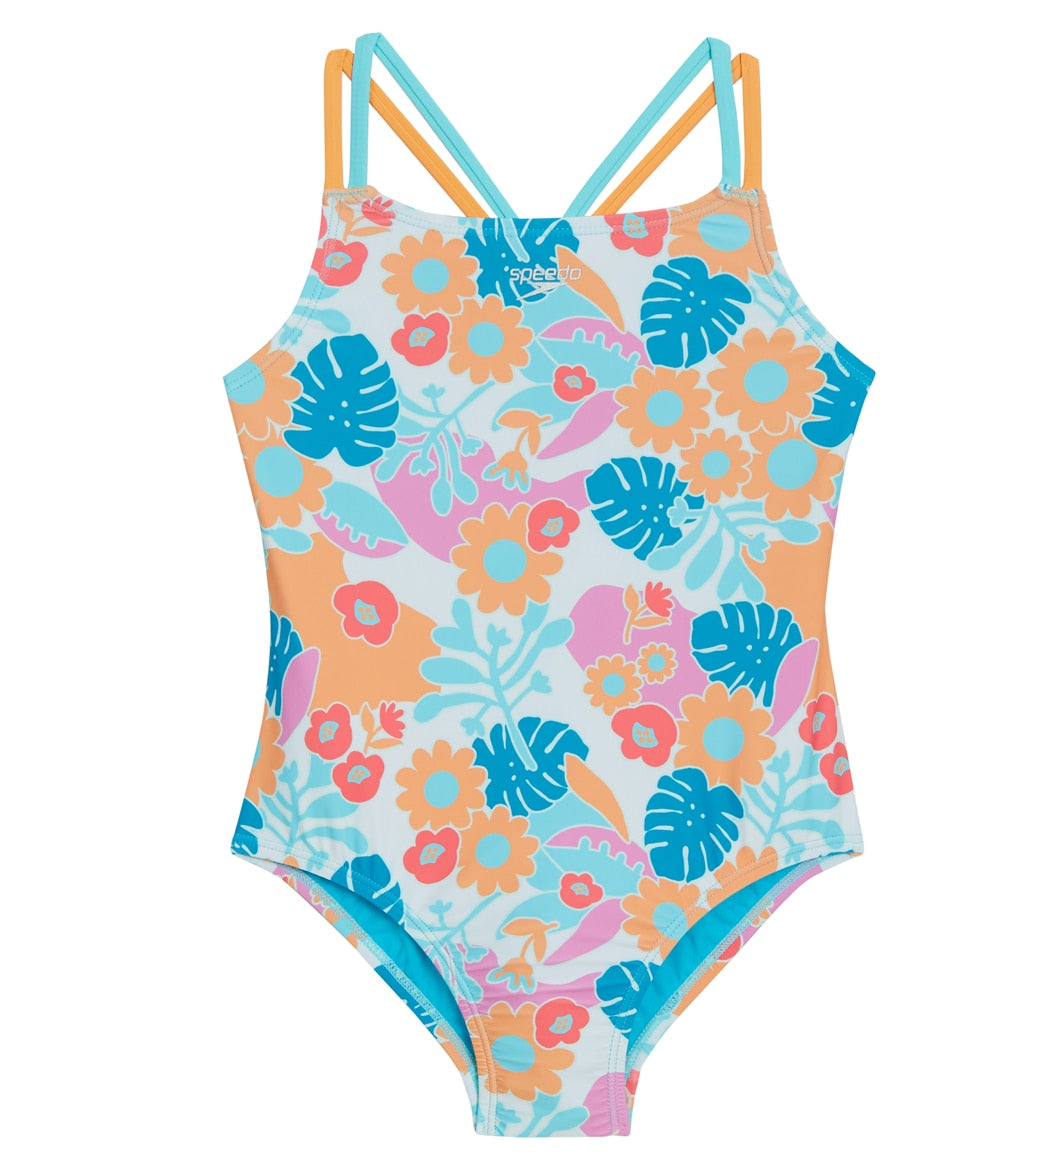 Speedo Girls' Printed Strappy One Piece Swimsuit (Big Kid) at SwimOutlet.com